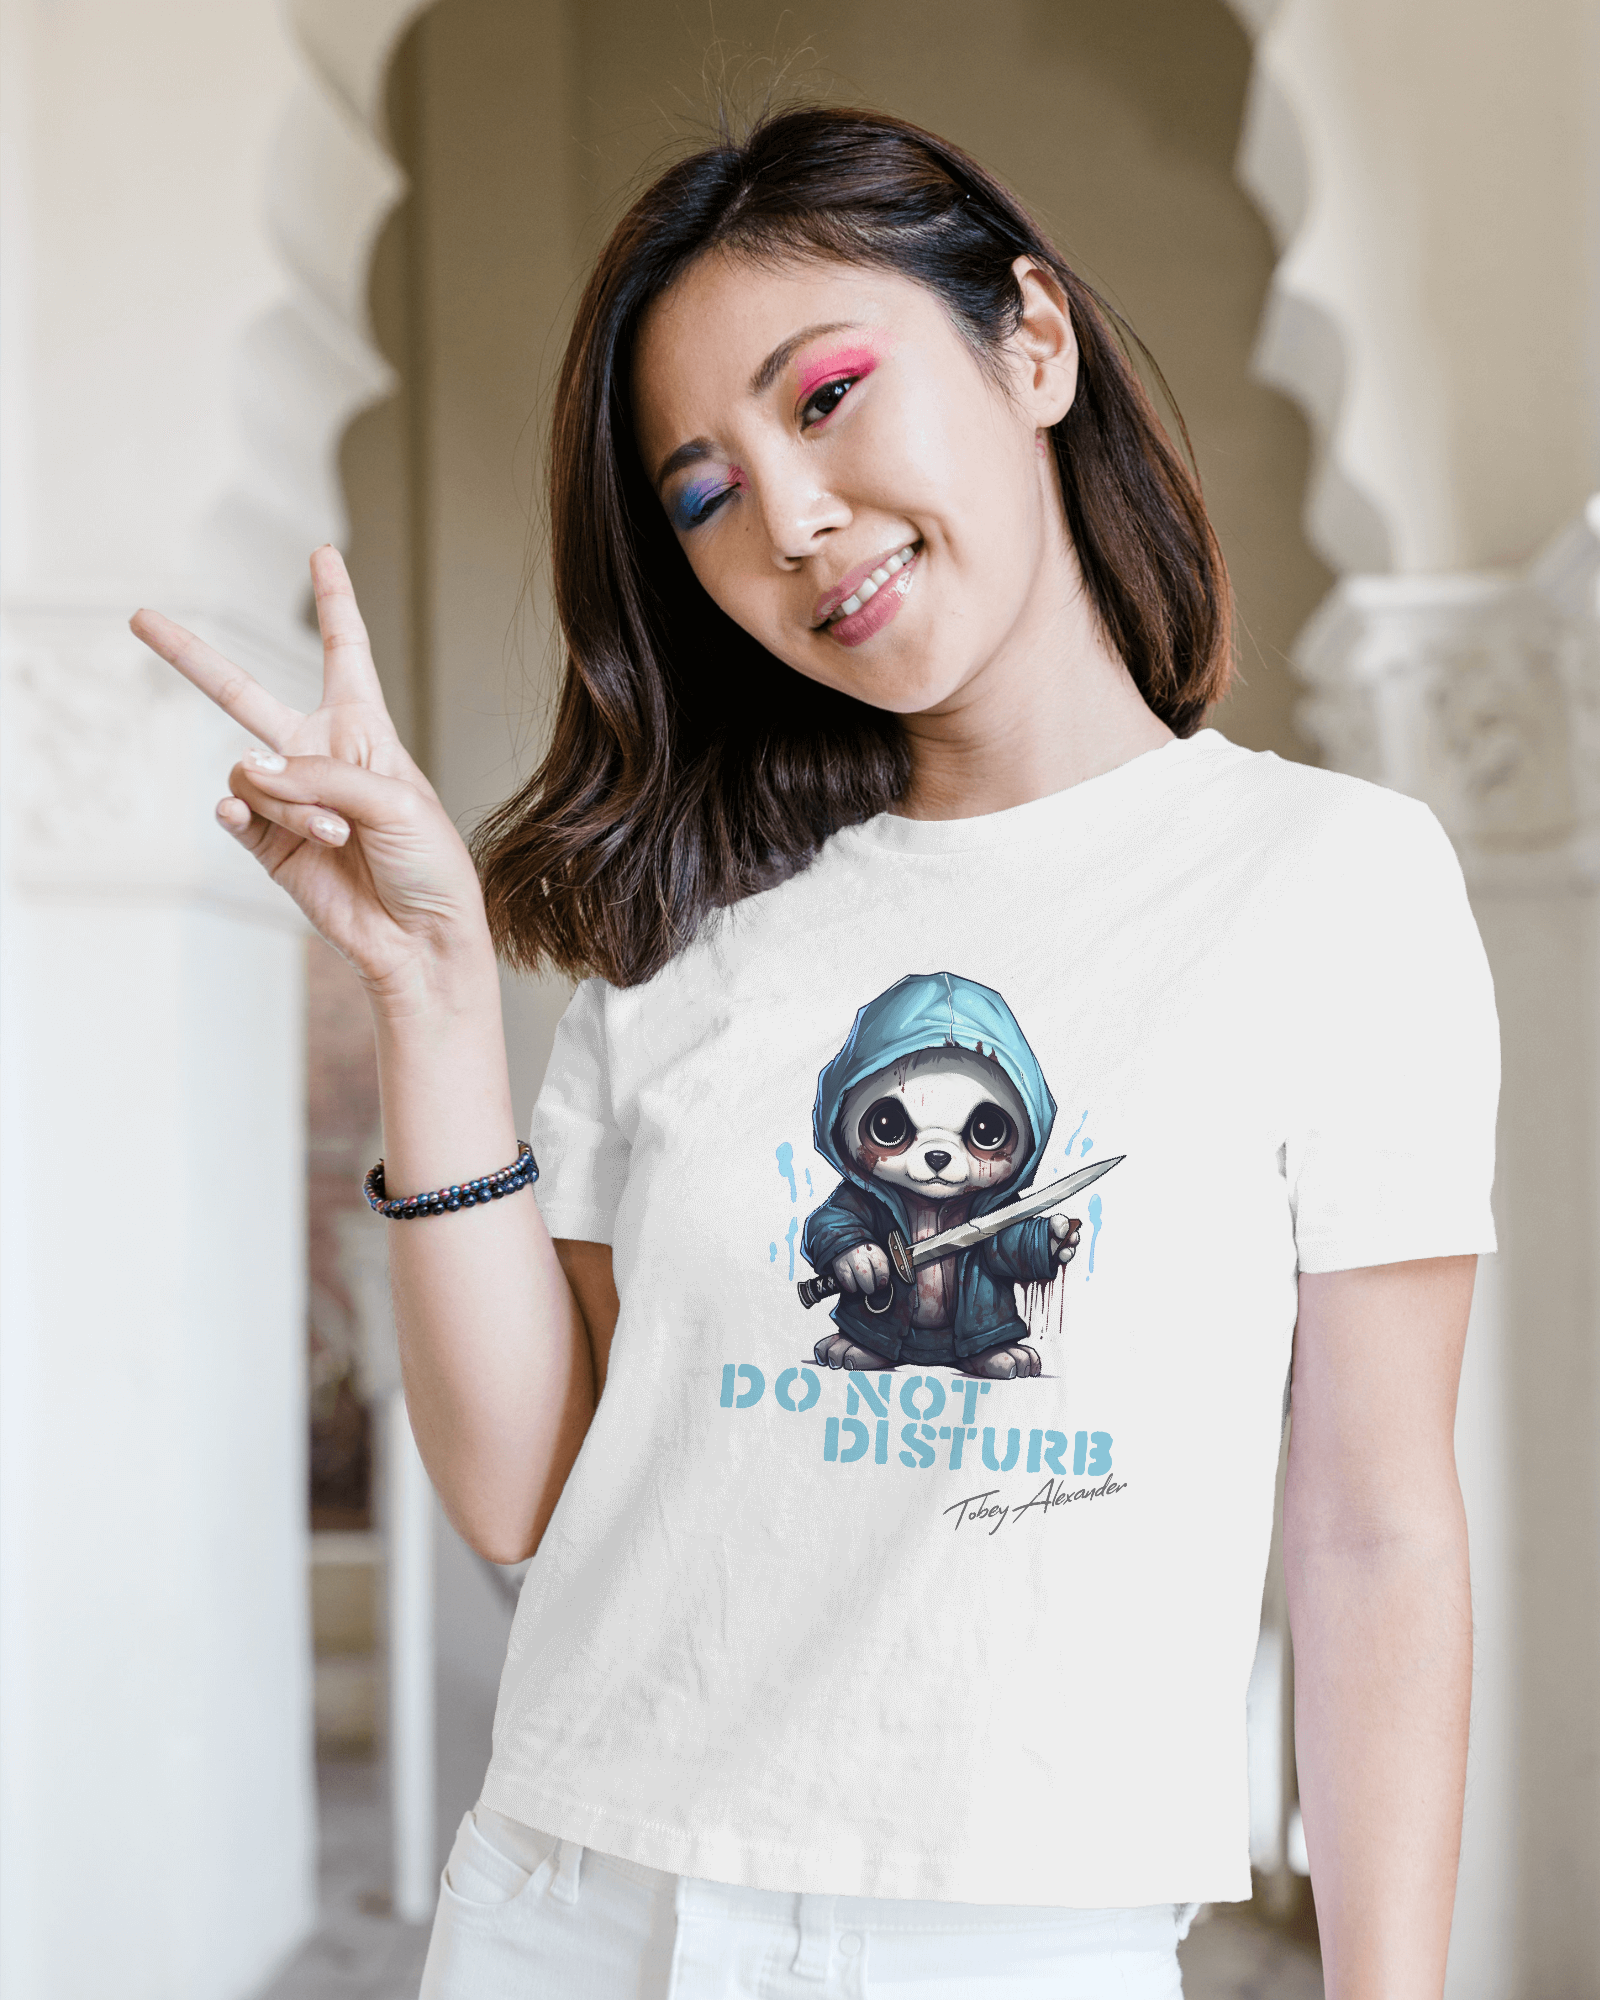 DND Diversity-Expressive Panda: Unisex Organic Crewneck Tee for Unique Self-Expression Clothes By Tobey Alexander